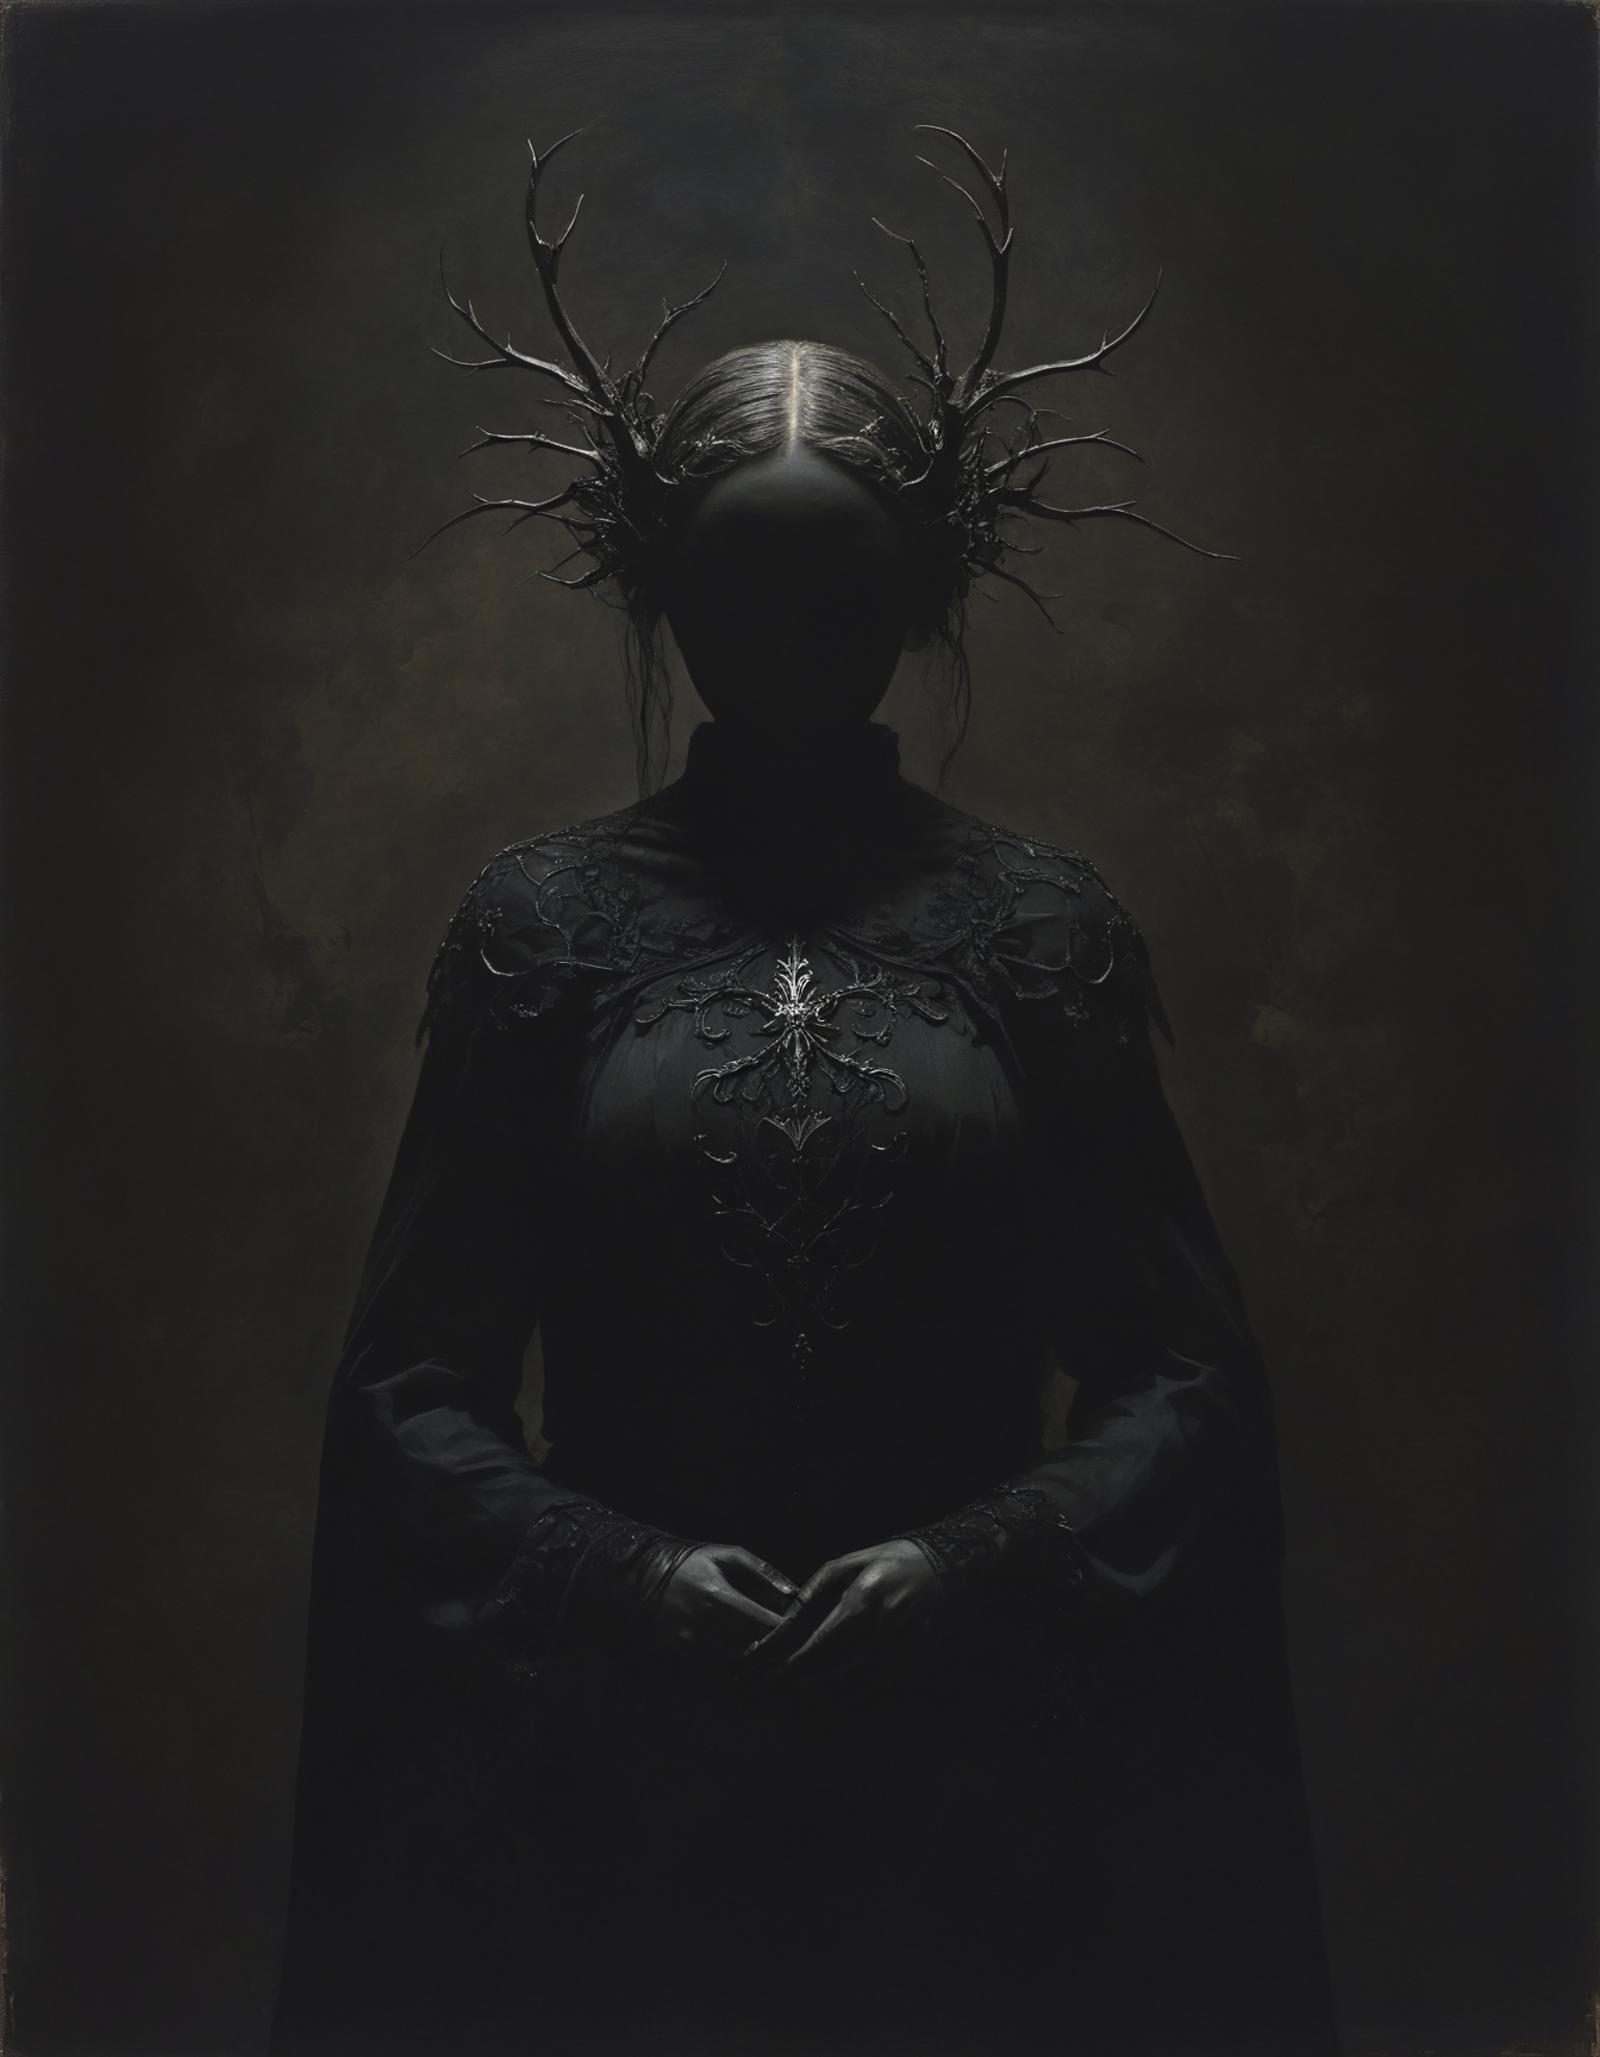 A Dark and Mysterious Portrait of a Woman with Horns on Her Head